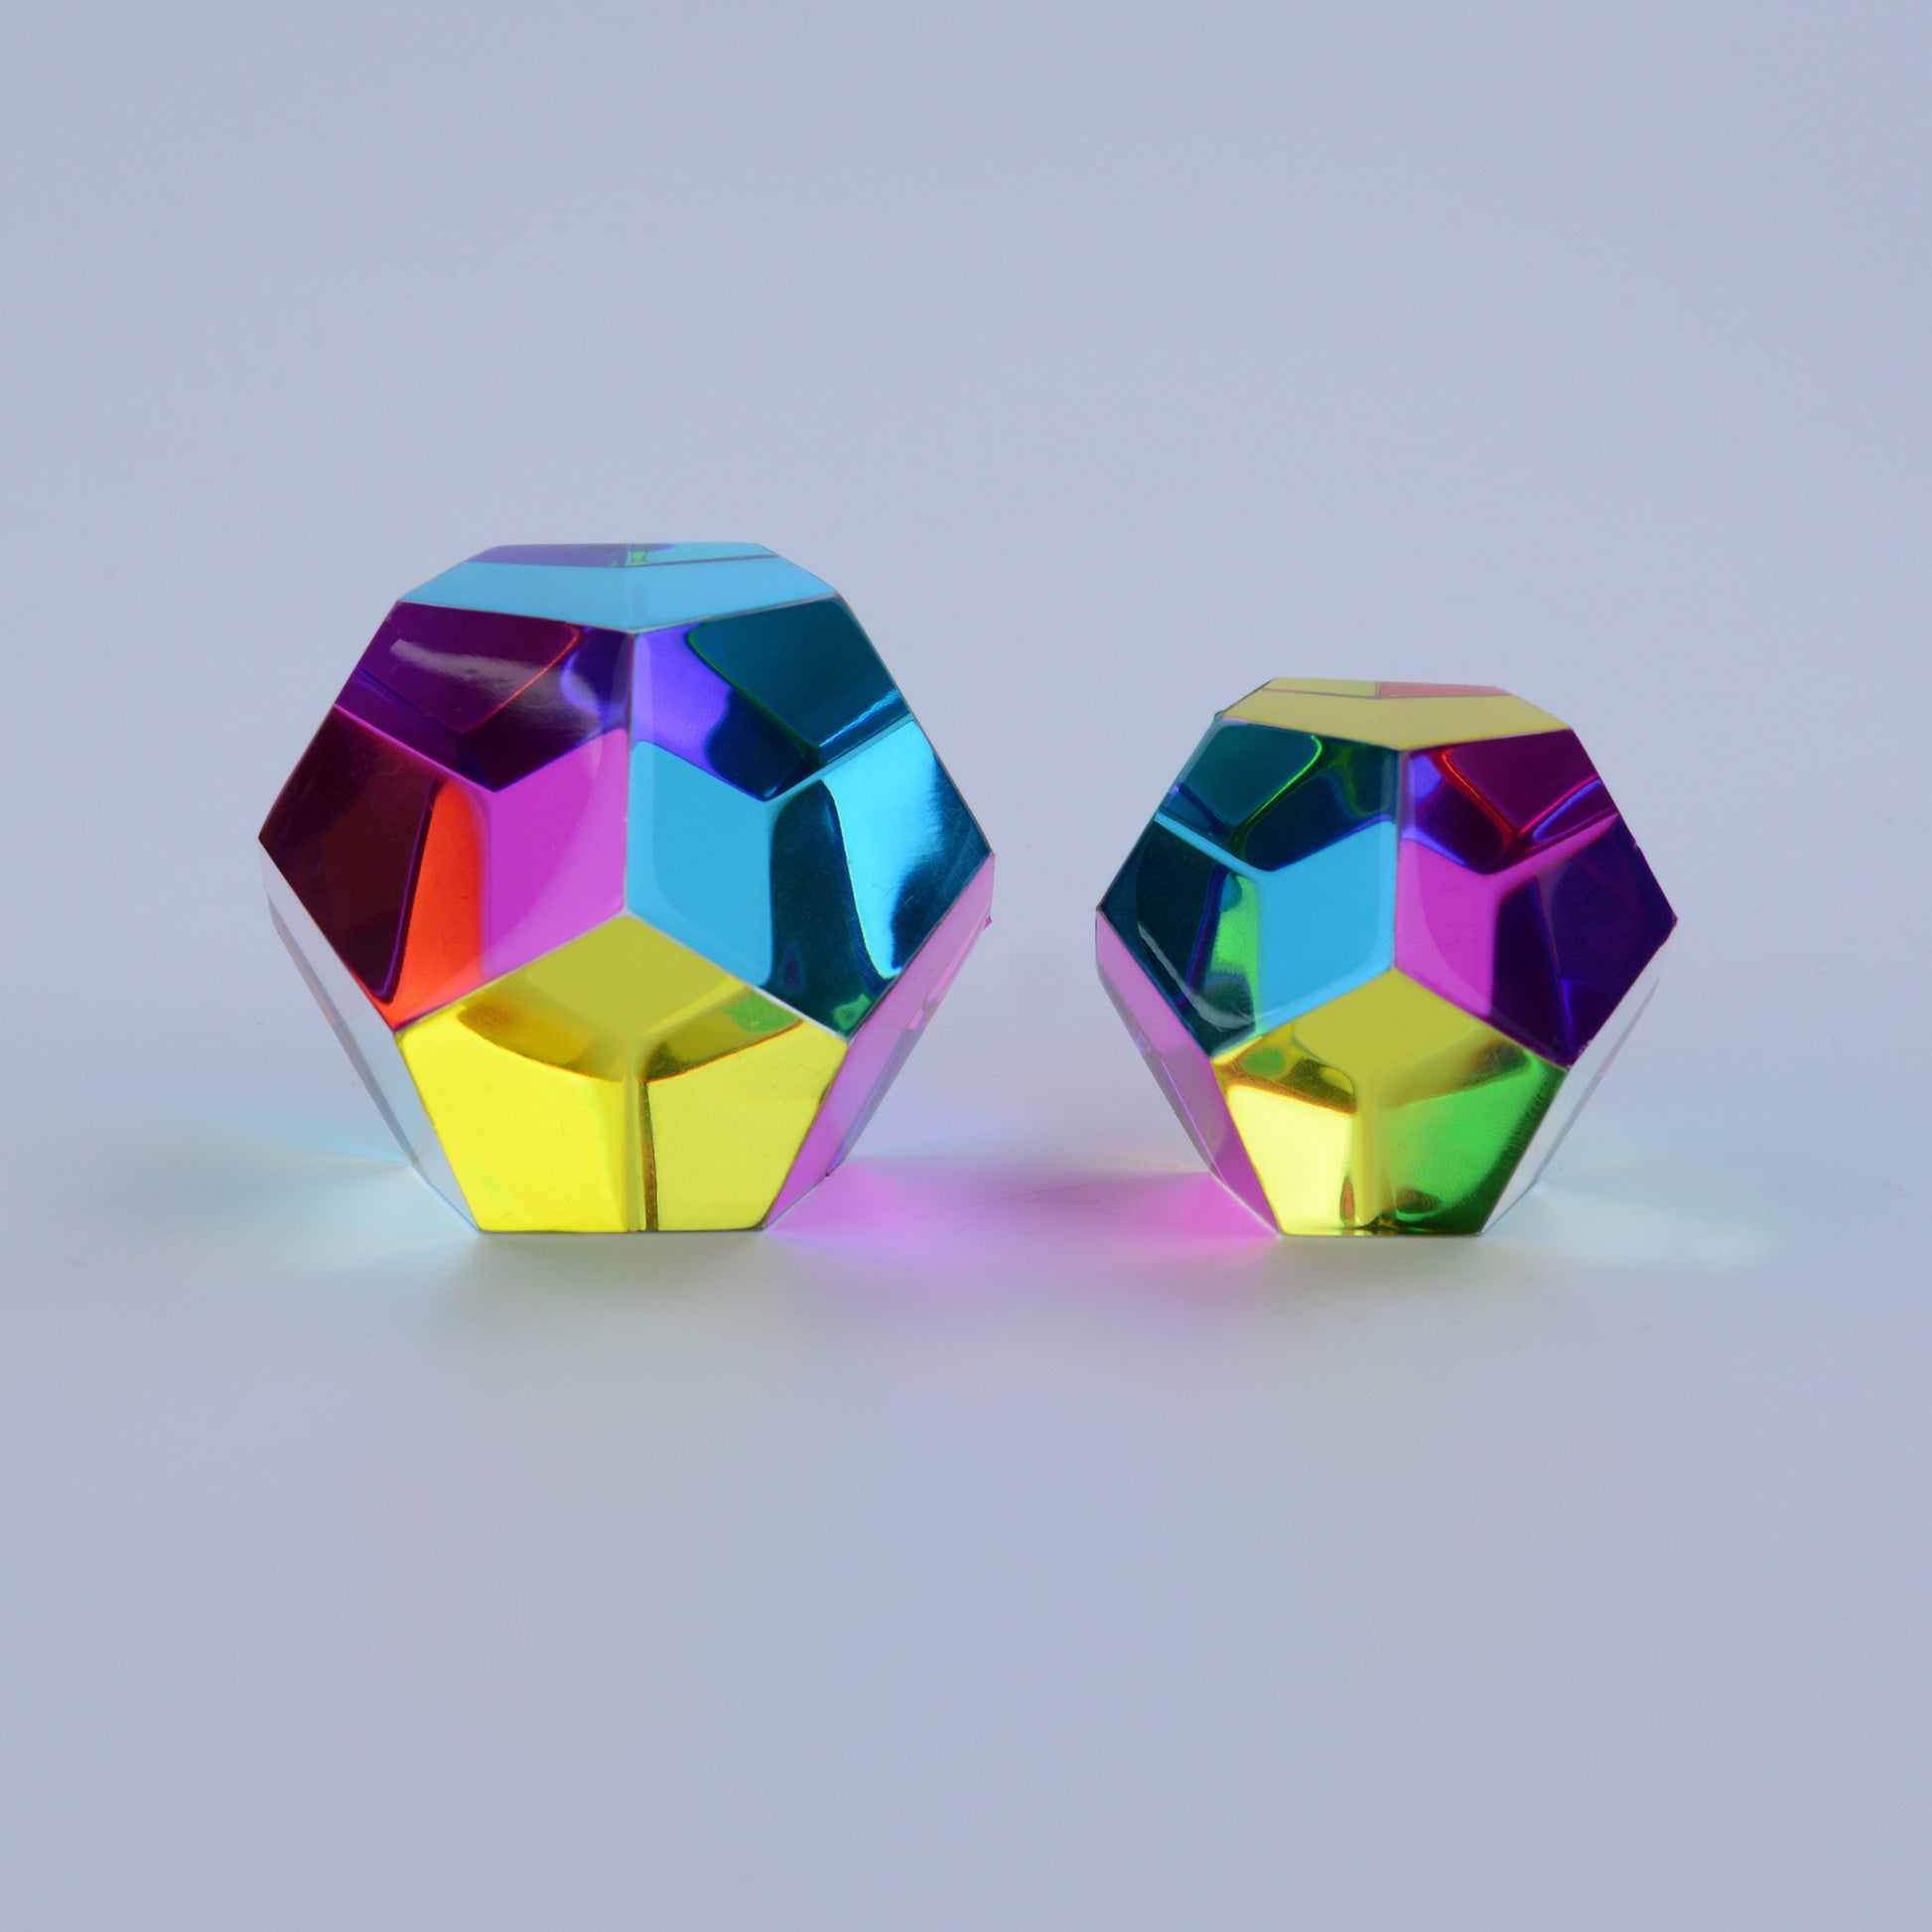 CMY DODECAHEDRON - CMY Cubes